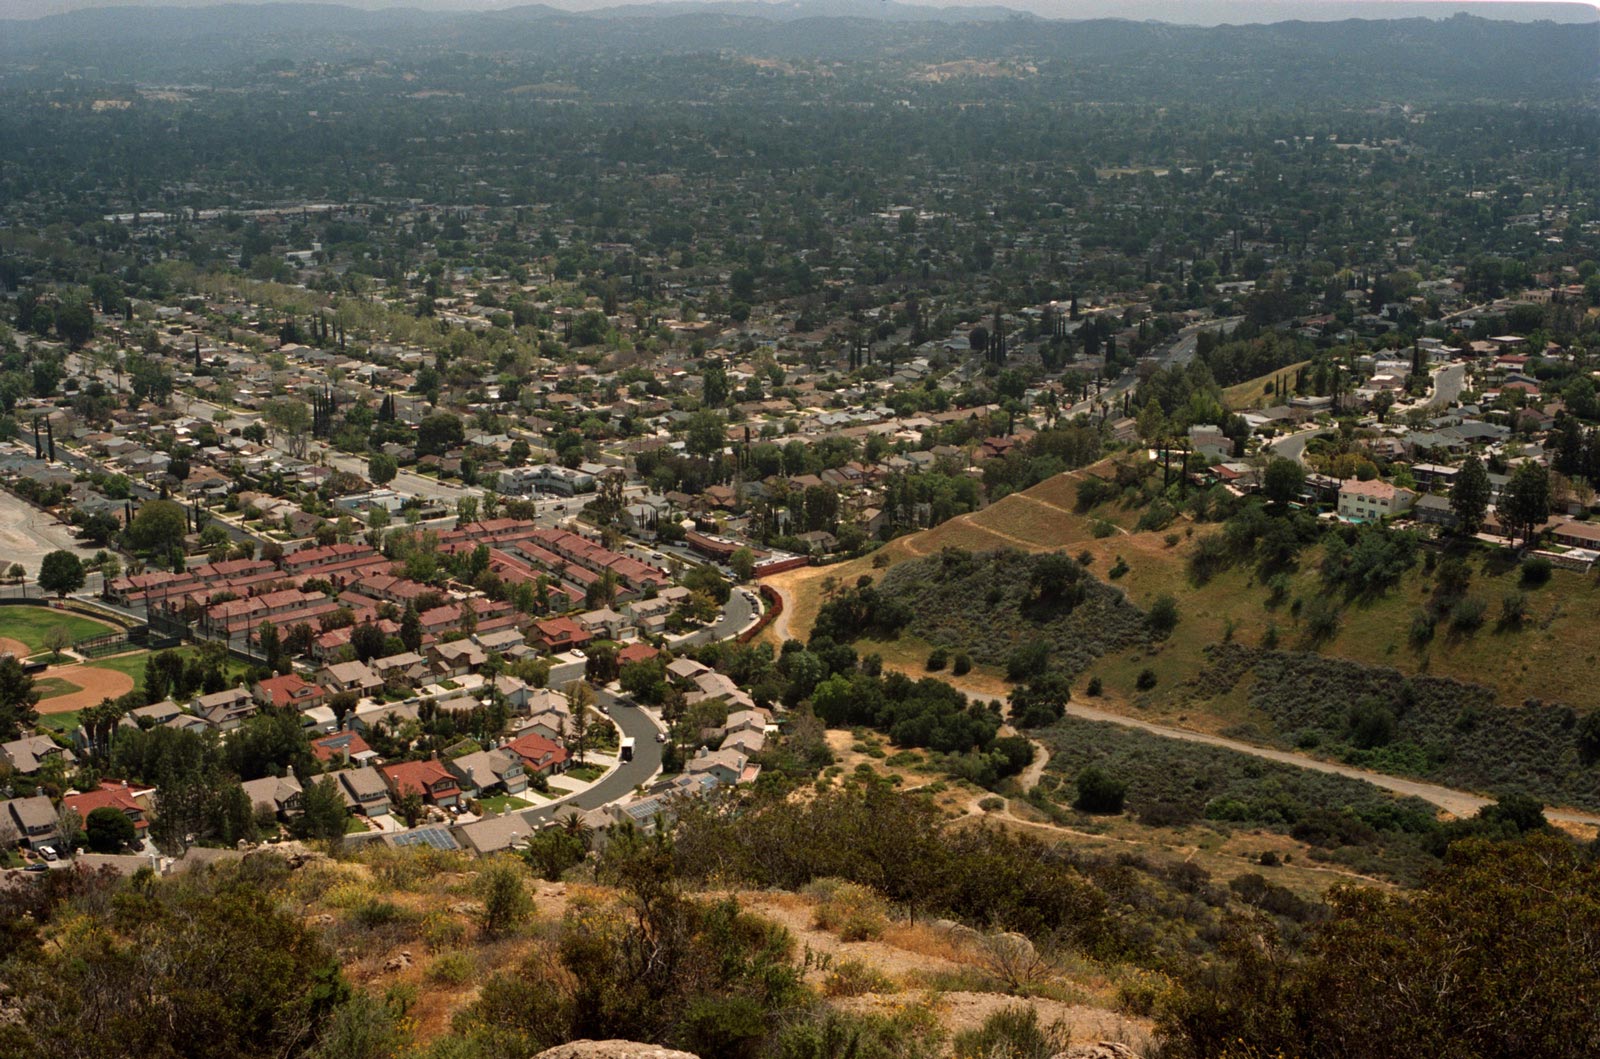 Looking down on the houses, West Hills, Los Angeles.